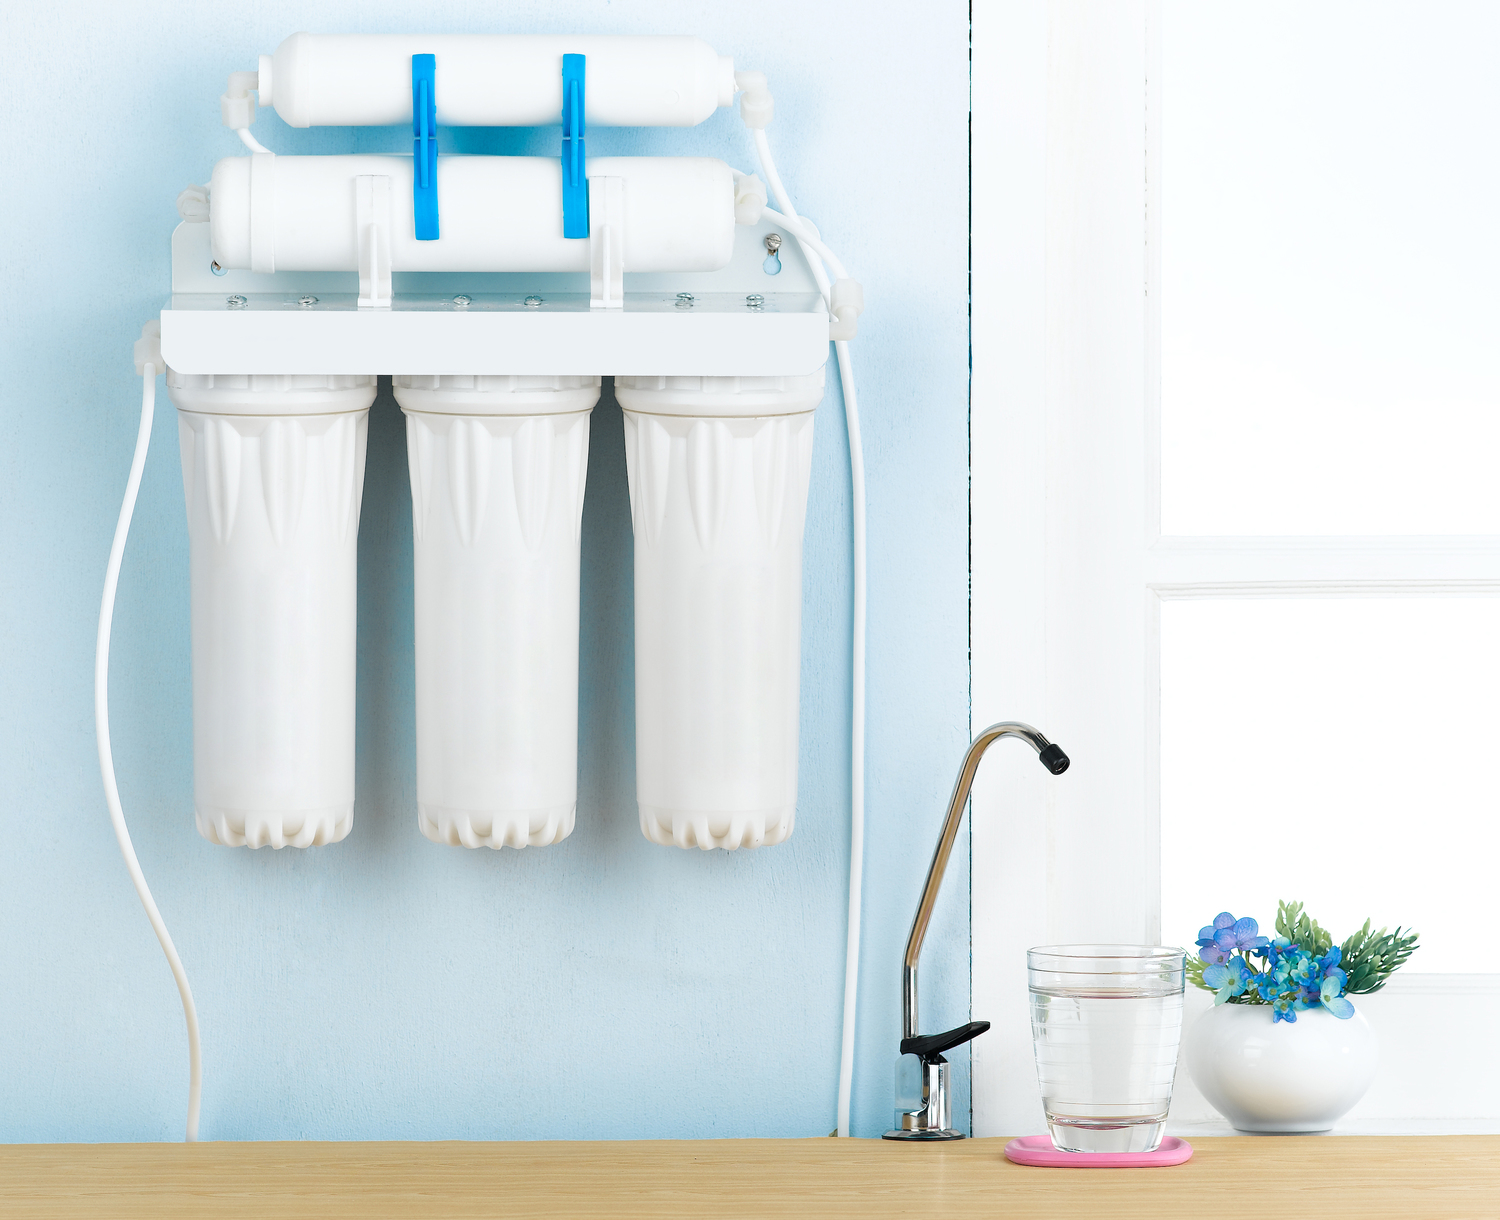 Tips to Choose the Right Water Softener